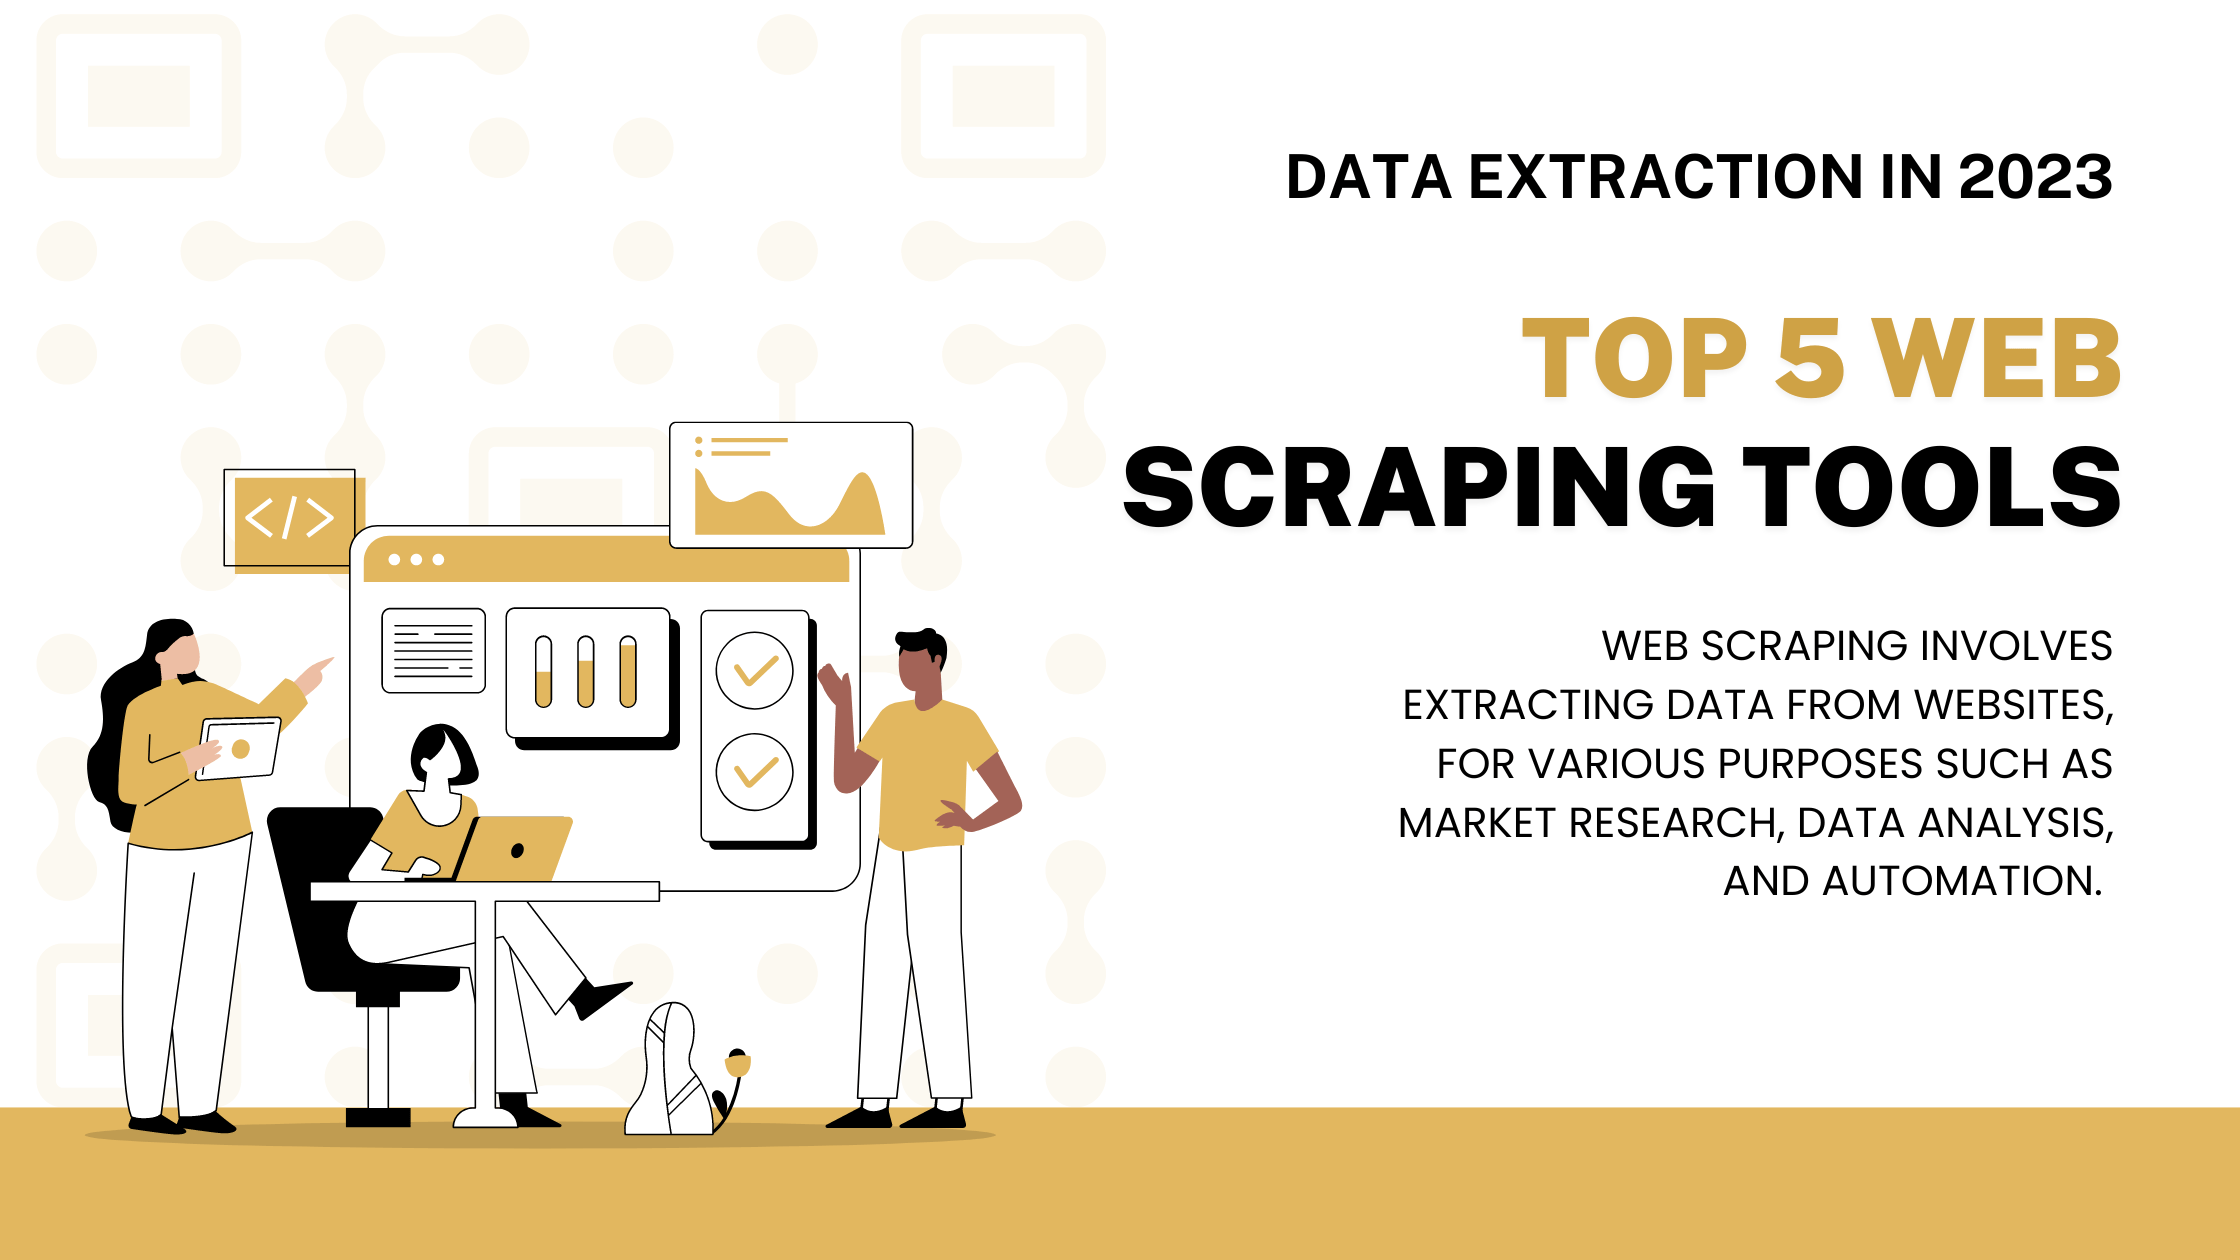 Data-Extraction-Made-Easy-The-Top-5-Web-Scraping-Tools-Every-NodeJS-Developer-Must-Know-in-2023